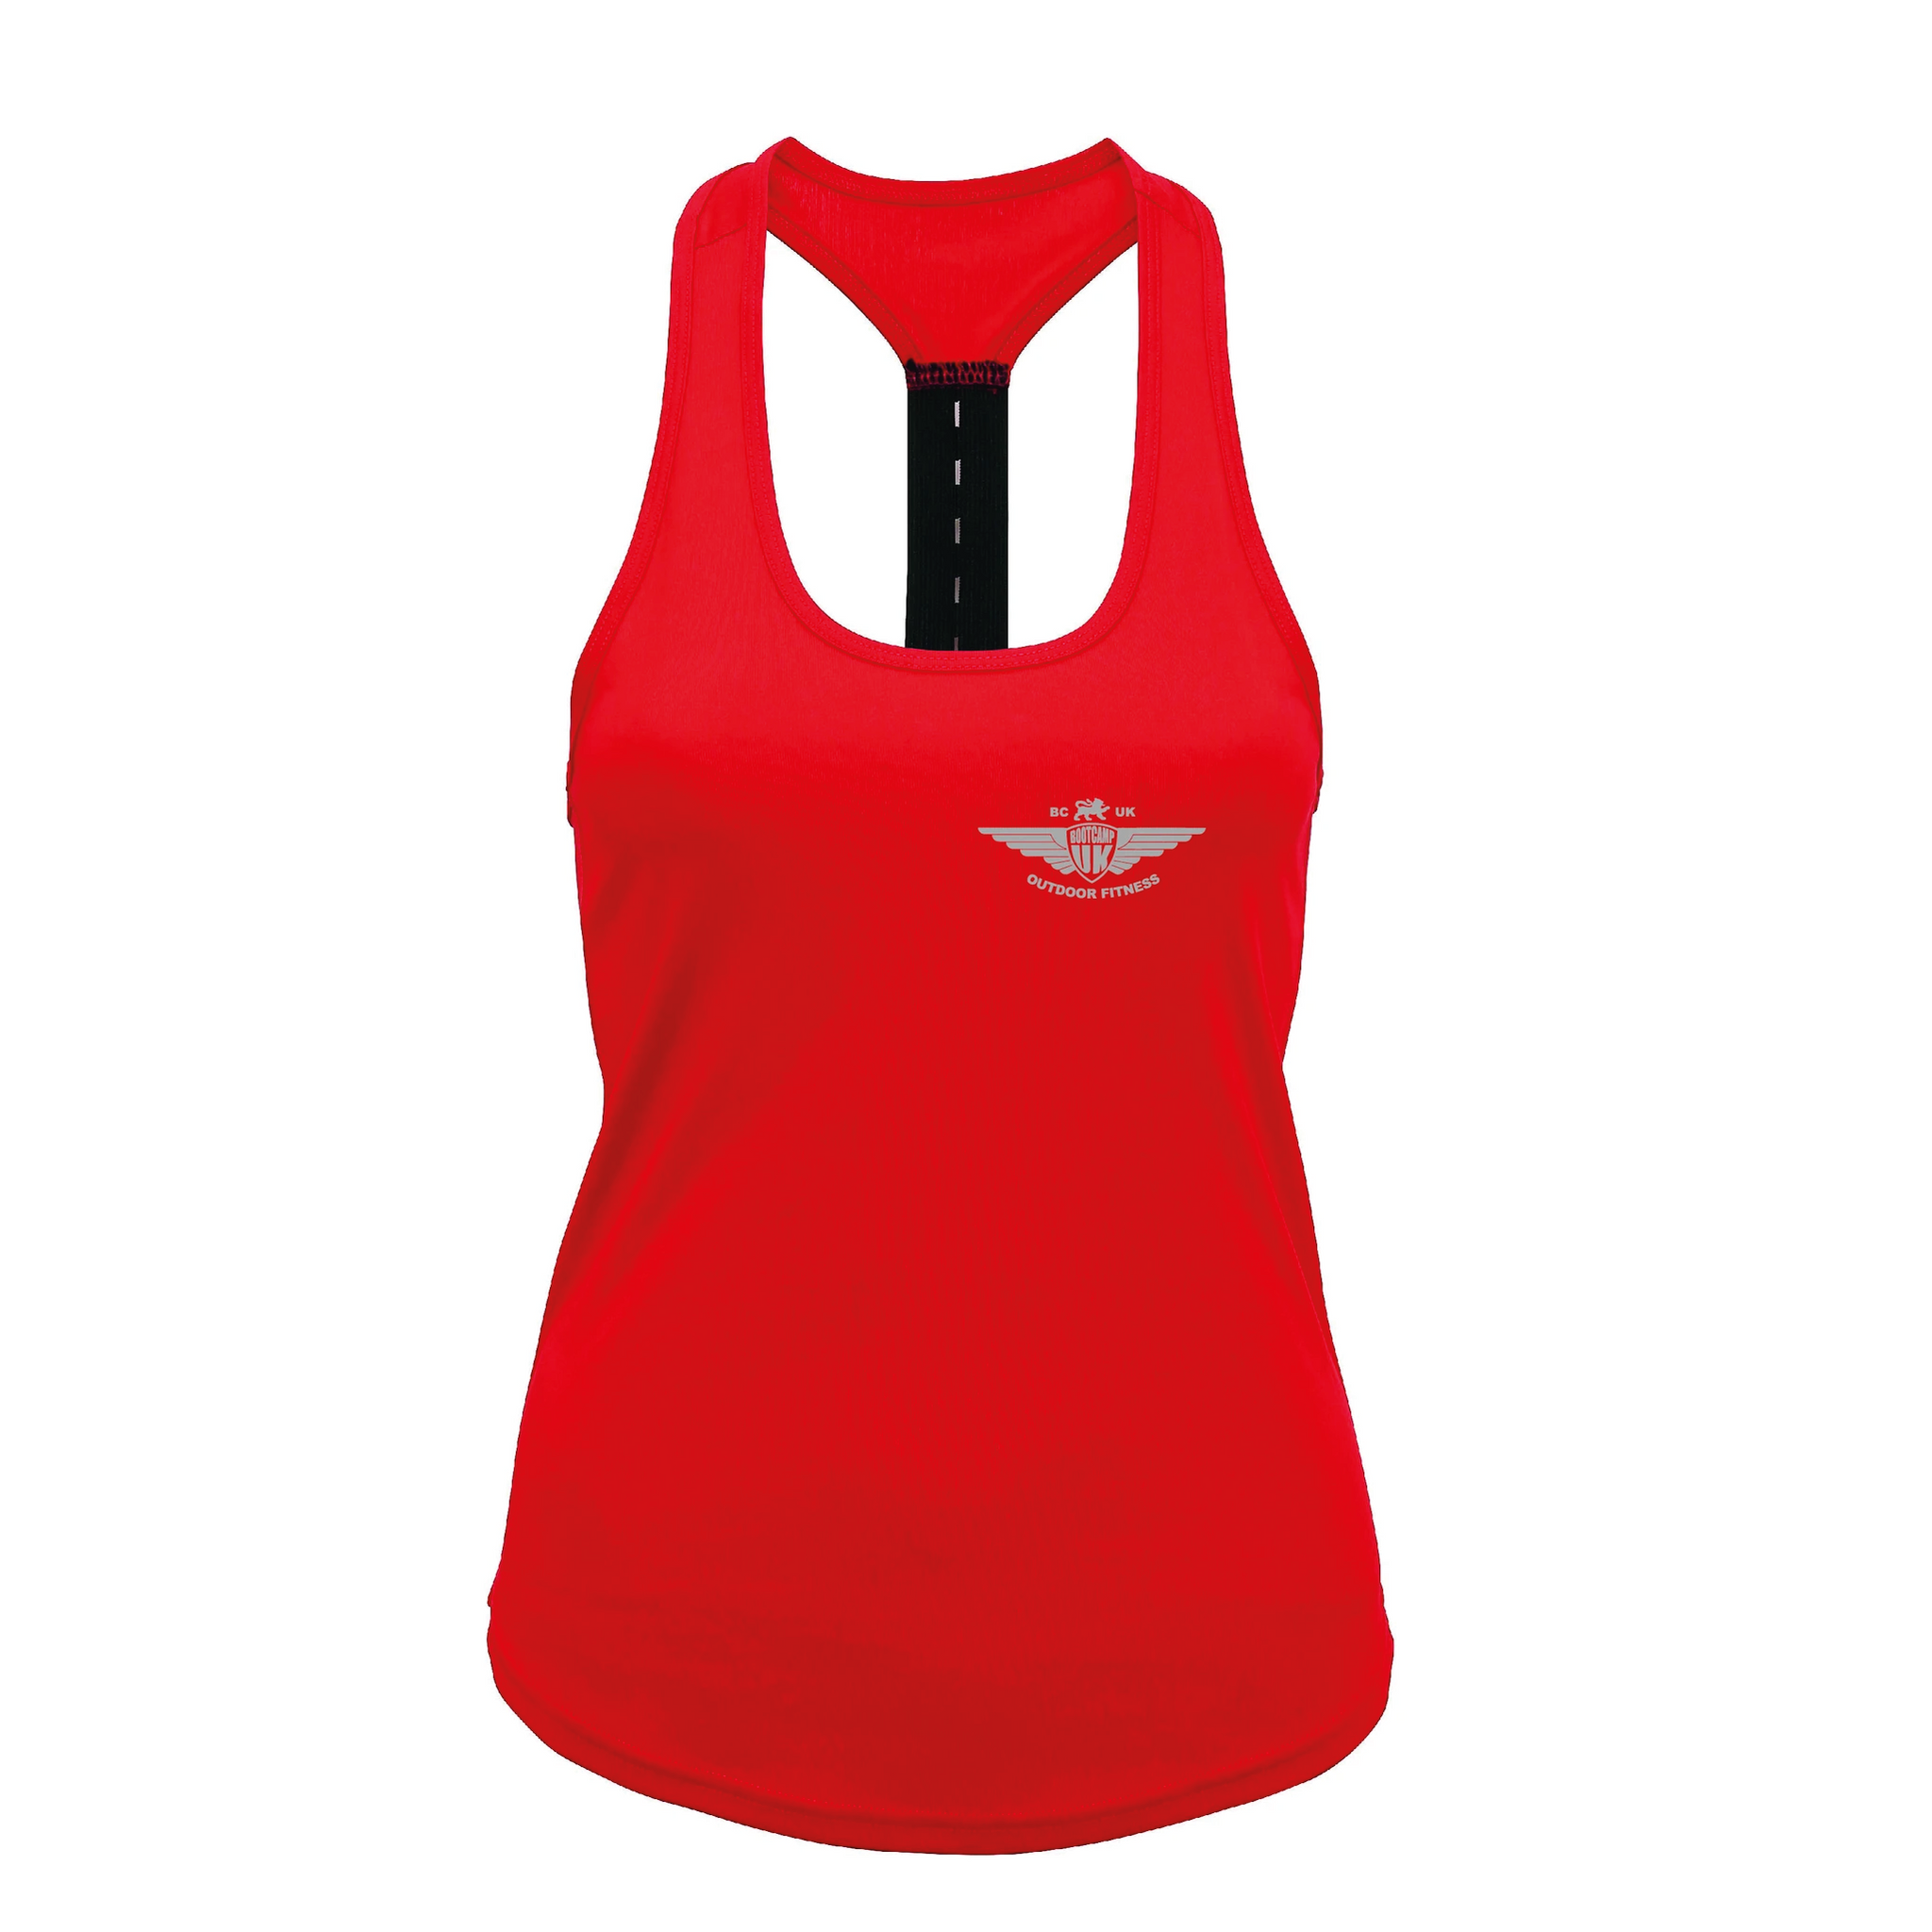 Small Red Ladies Strap back vest